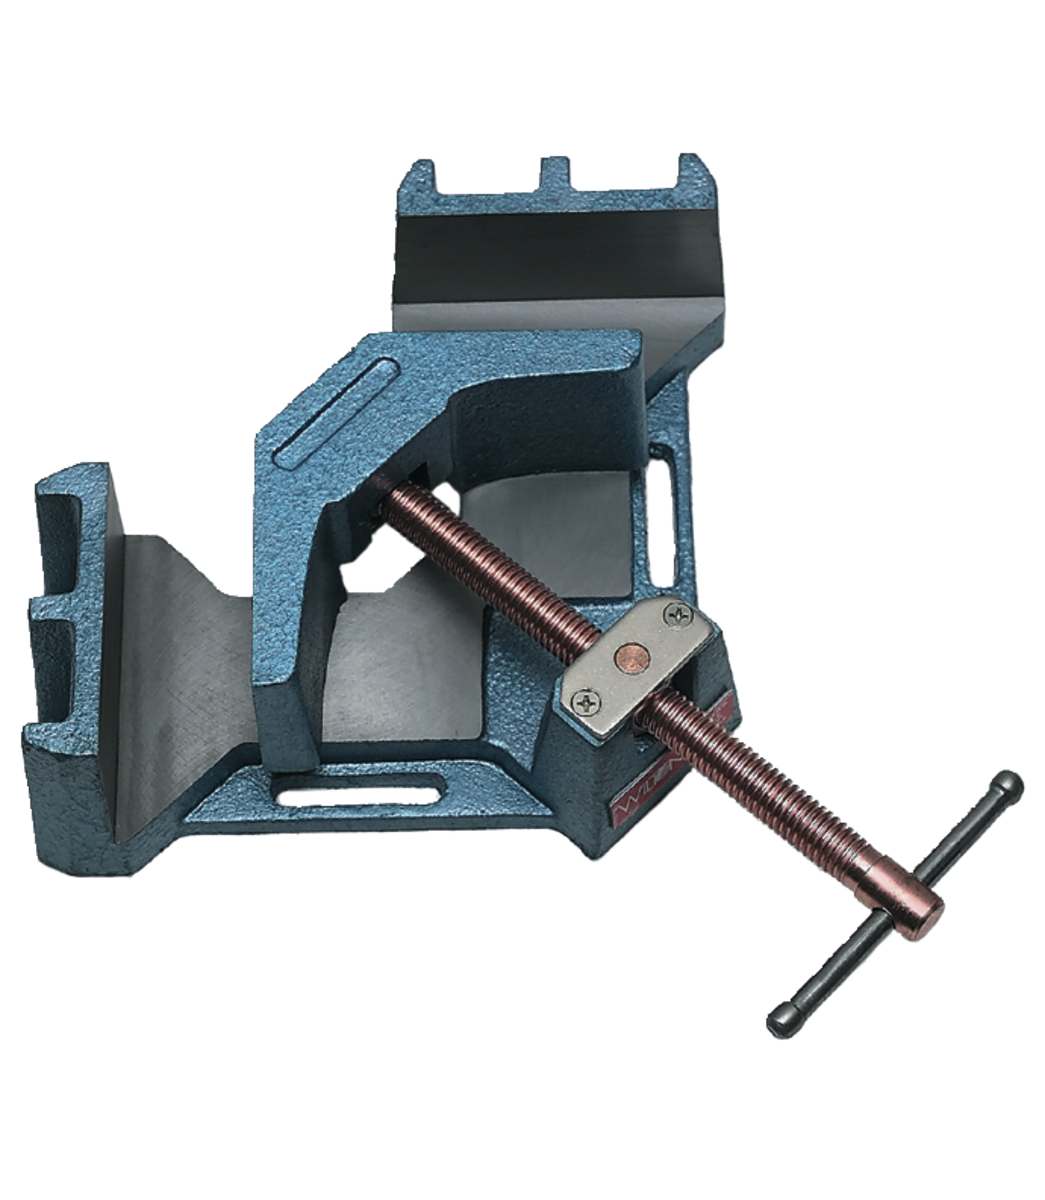 WILTON AC-325 Heavy-Duty Steel Angle Clamp, 3-11/32" Miter Capacity, 1-3/8" Jaw Height, 4-1/8" Jaw Length